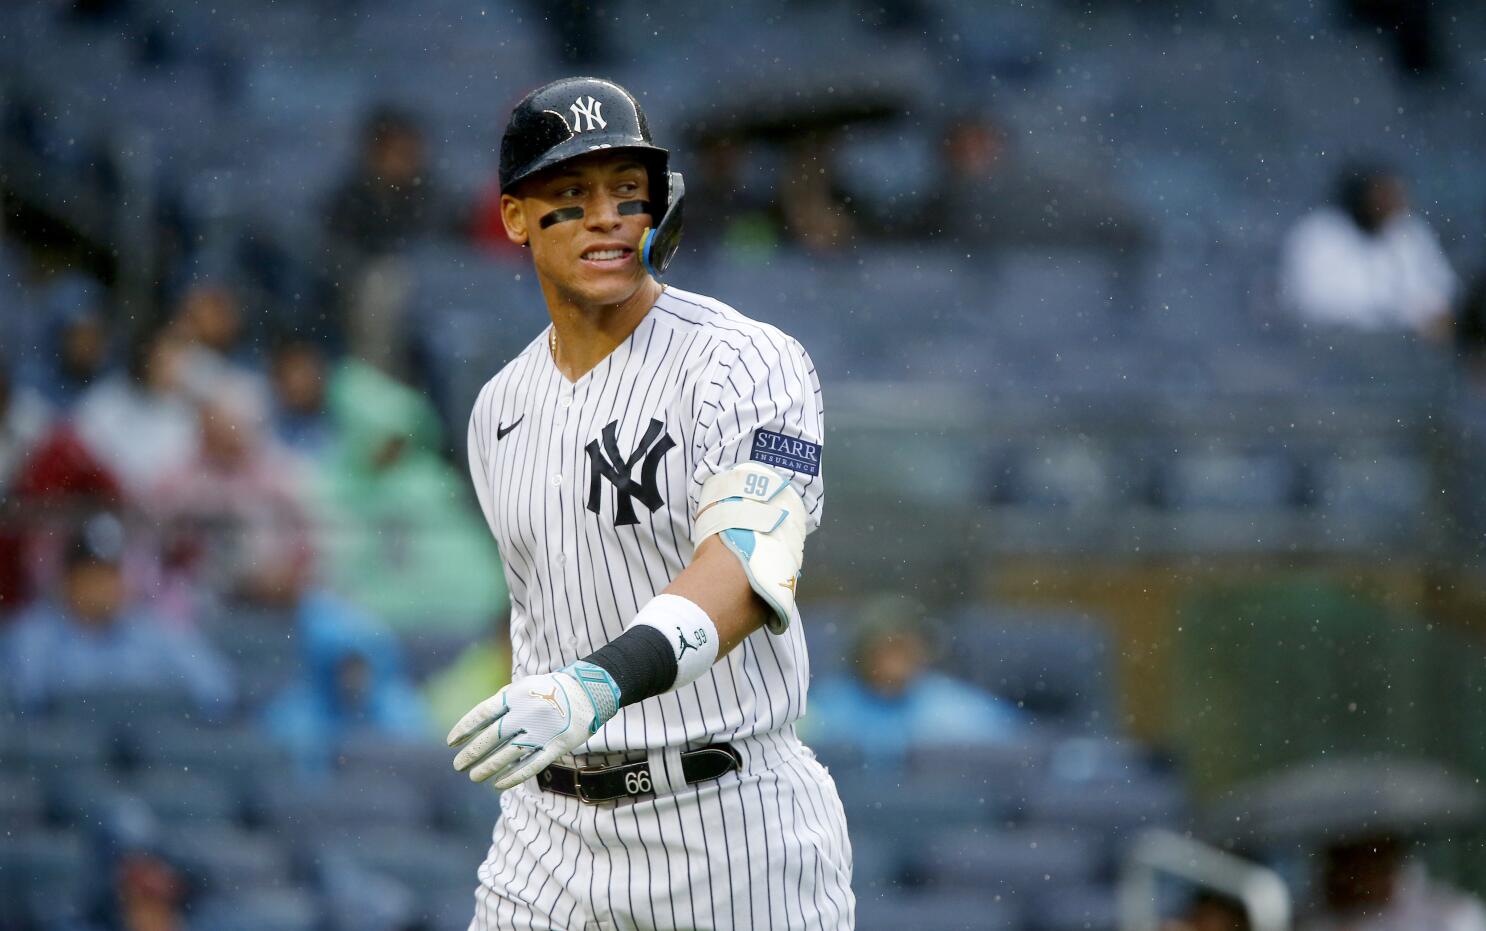 Aaron Judge, Giancarlo Stanton didn't lift as much in offseason